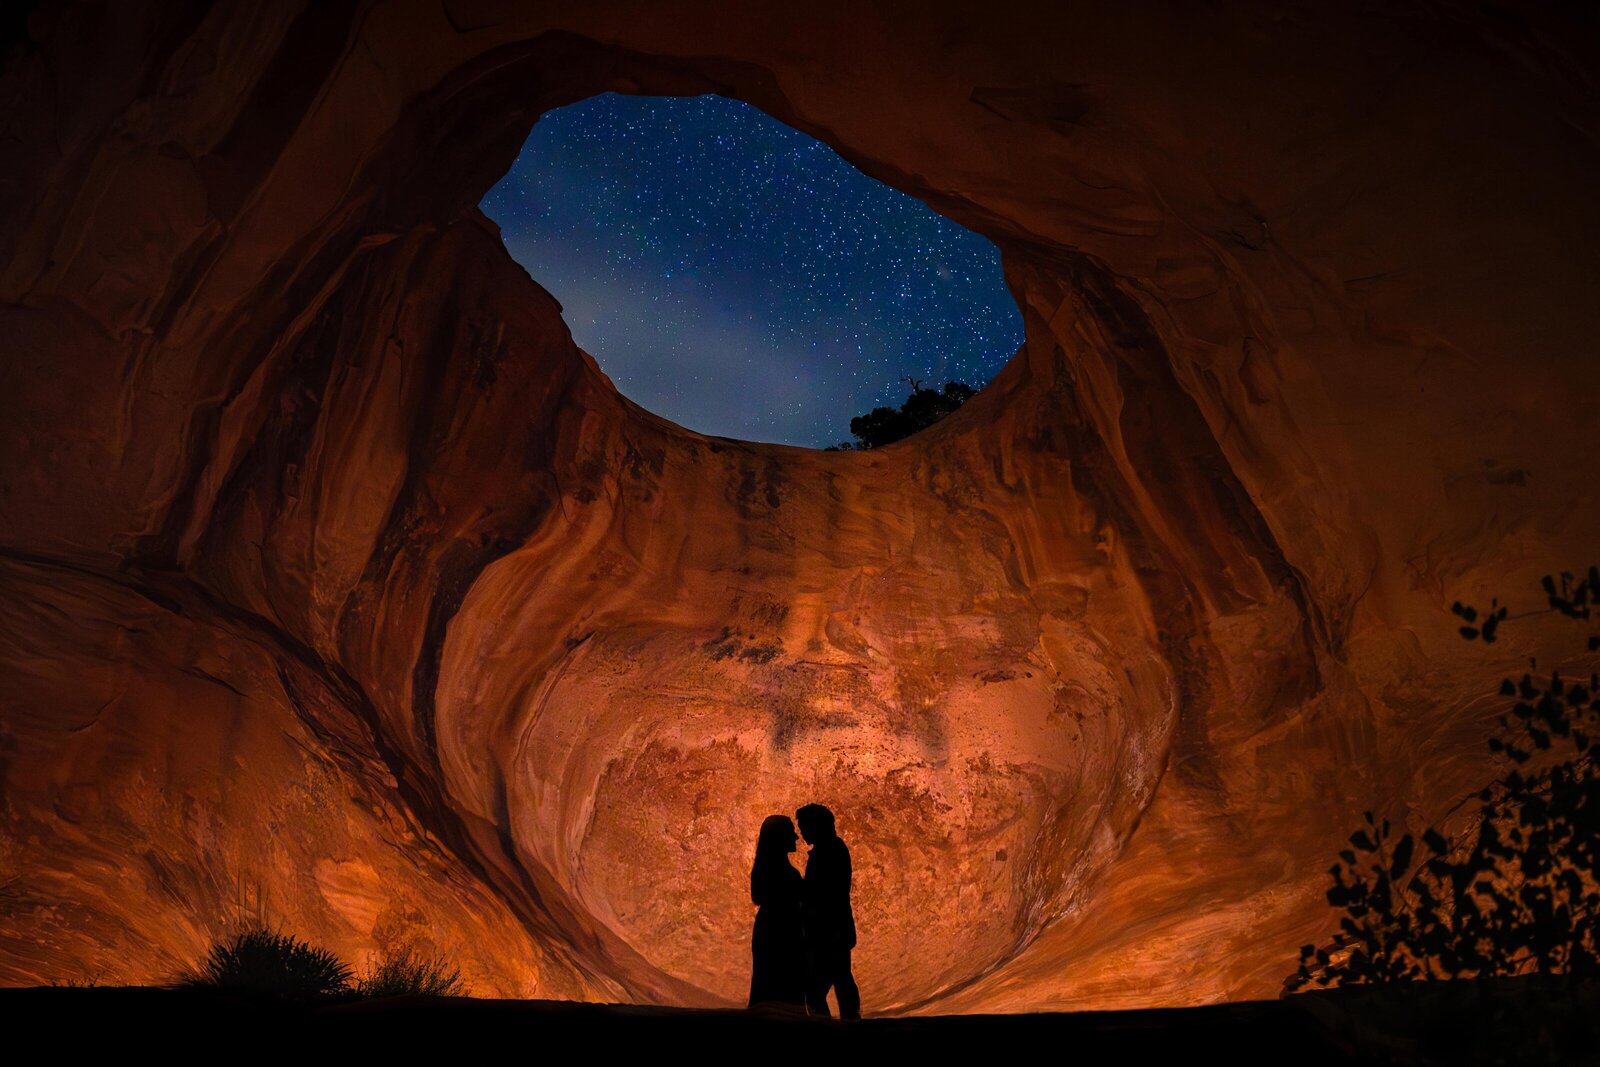 Couple silhouetted underneath Bowtie Arch in Moab under the stars at night during their adventure engagement session.